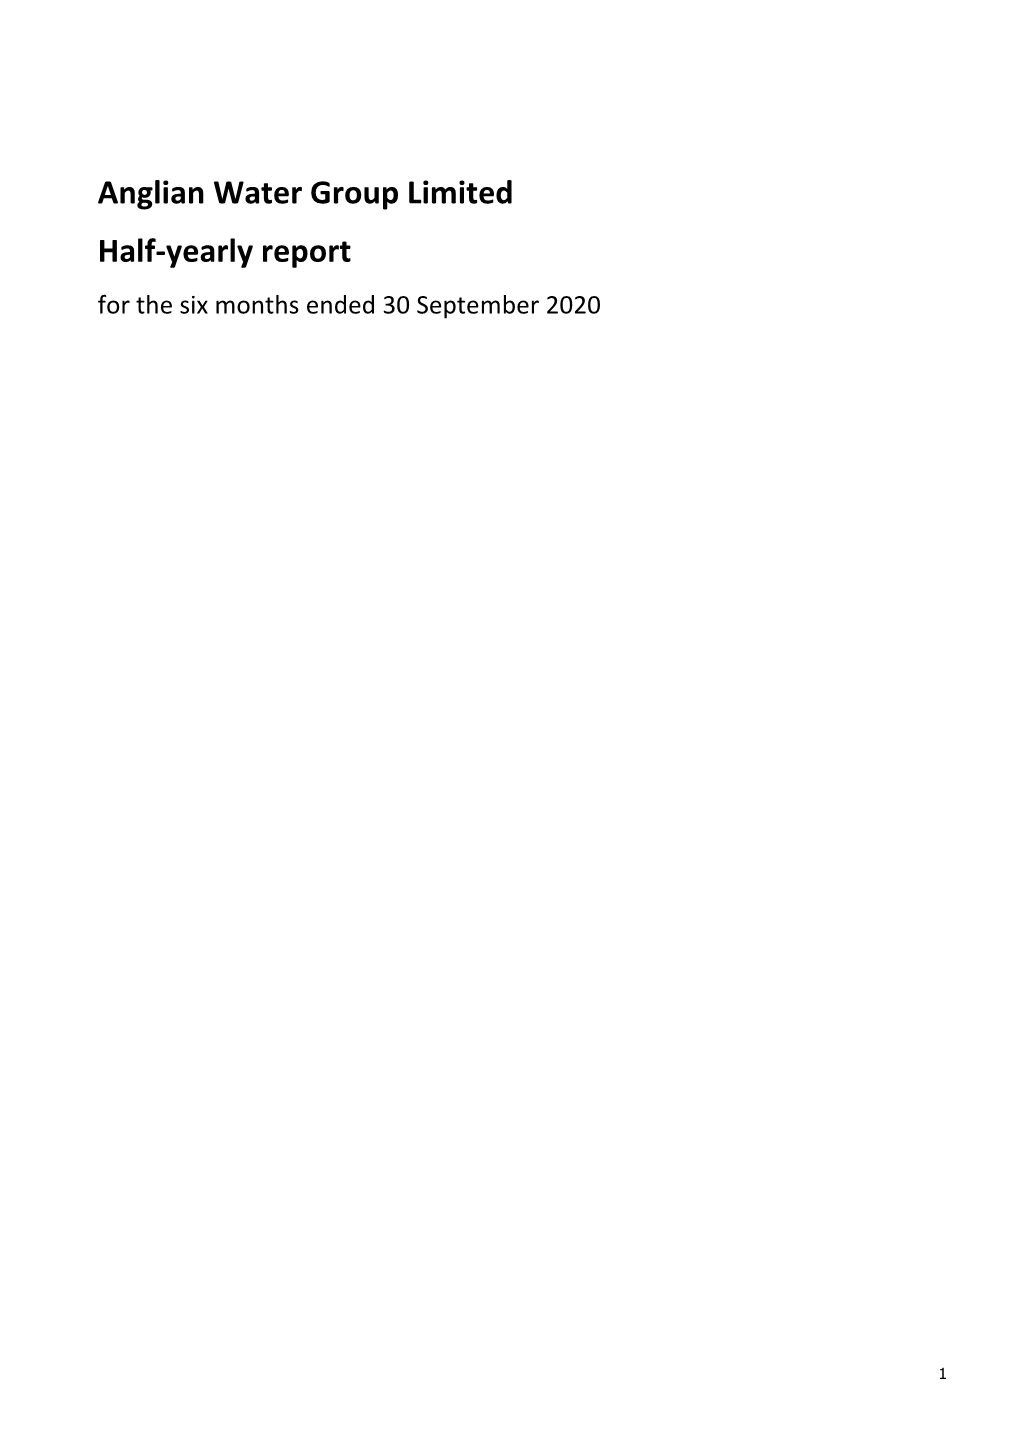 Anglian Water Group Limited Half-Yearly Report for the Six Months Ended 30 September 2020